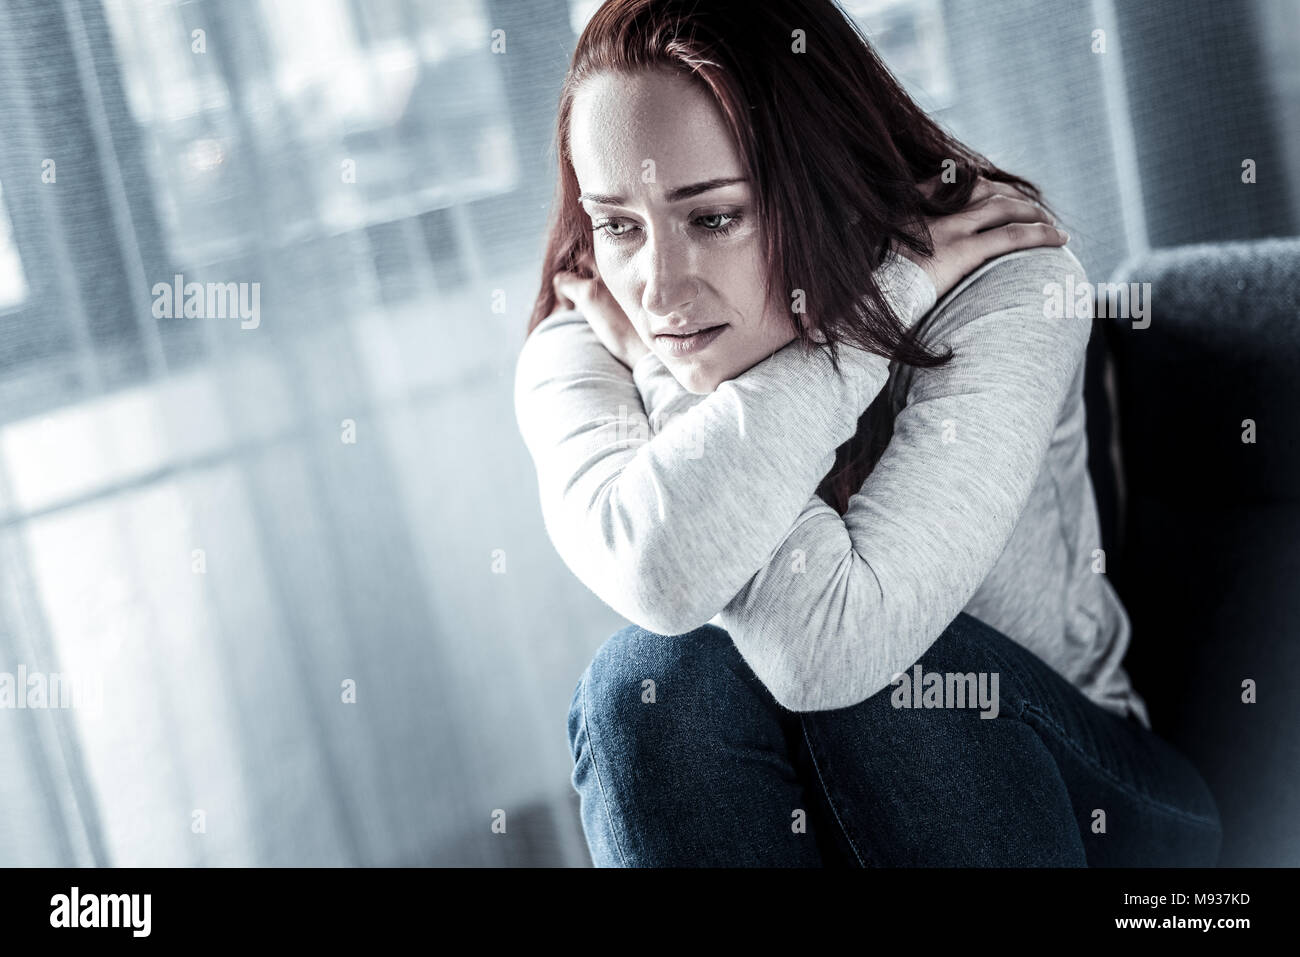 Stressful unhappy woman hugging herself and looking down. Stock Photo